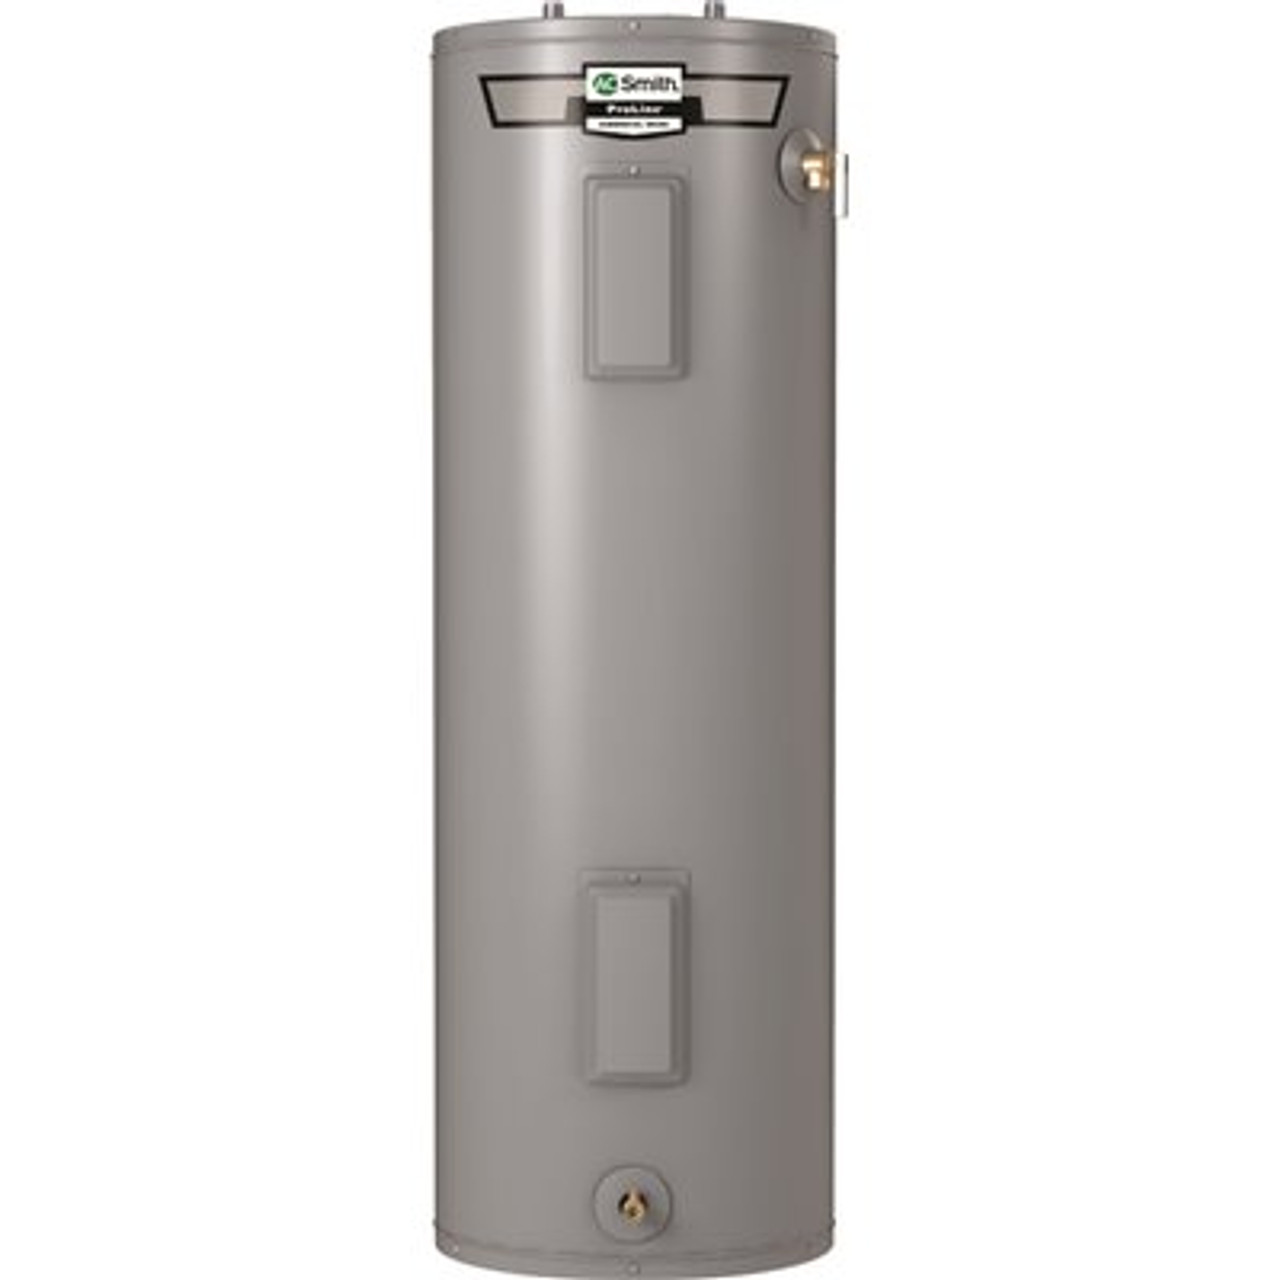 A. O. SMITH 40-Gallon Tall Electric Water Heater 18"d X 61-1/4" H